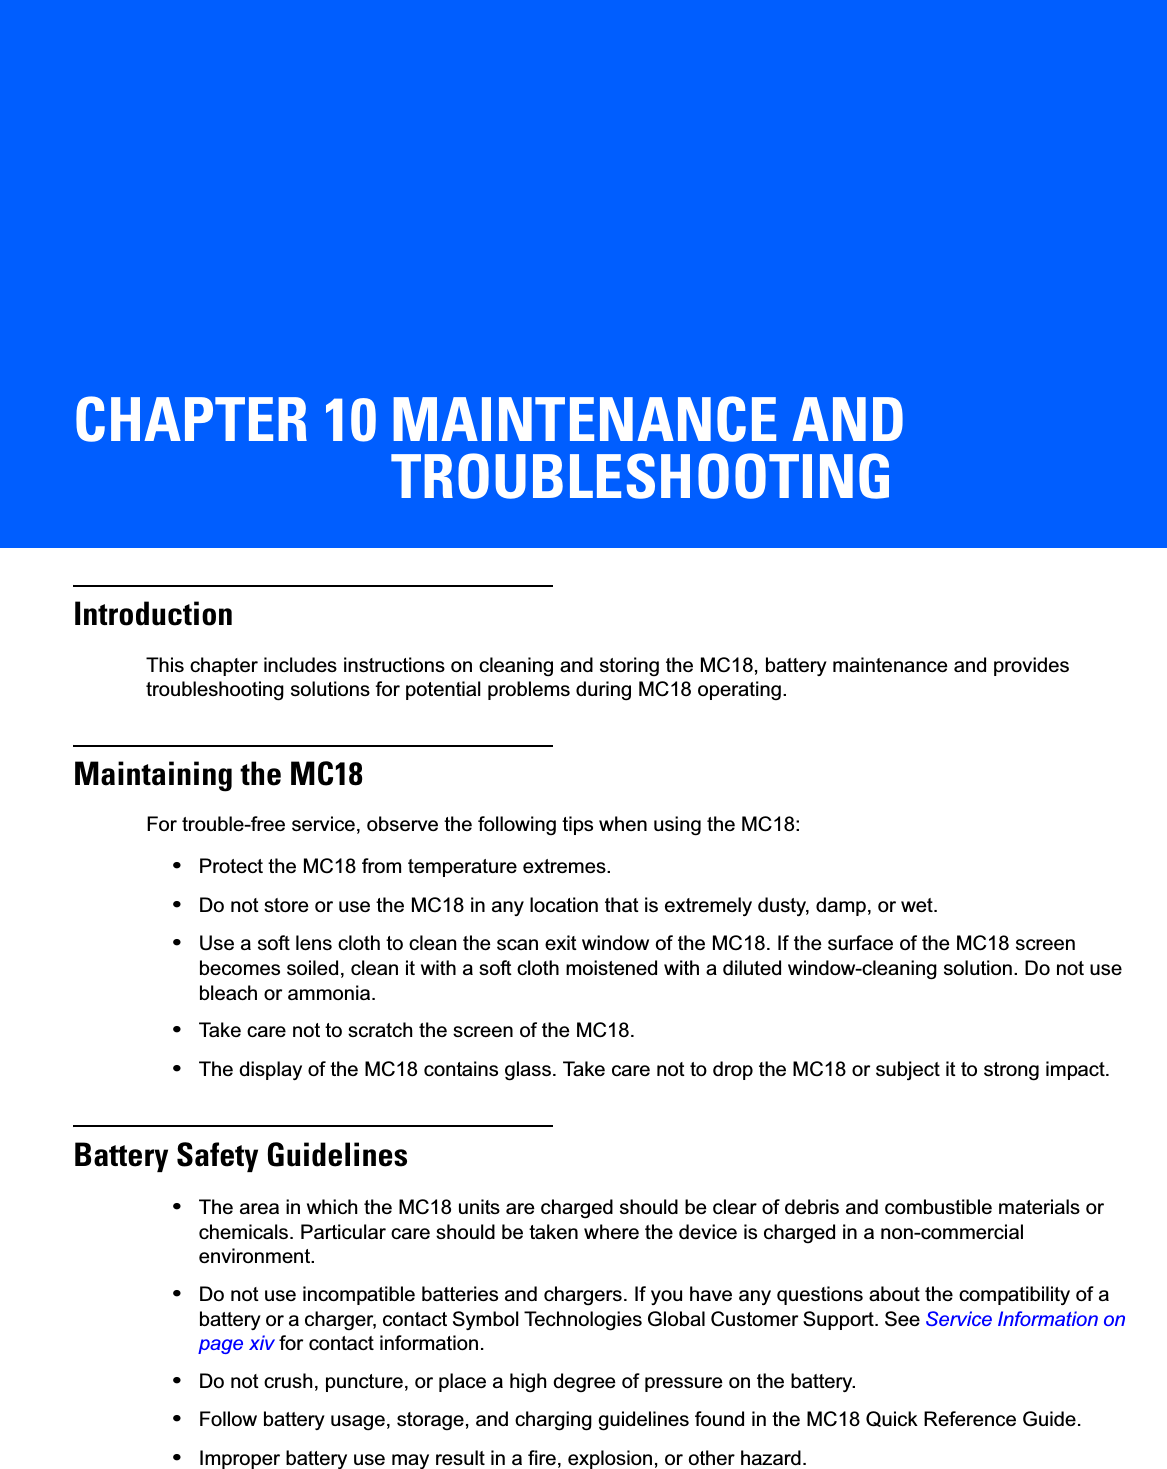 CHAPTER 10 MAINTENANCE AND TROUBLESHOOTINGIntroductionThis chapter includes instructions on cleaning and storing the MC18, battery maintenance and provides troubleshooting solutions for potential problems during MC18 operating.Maintaining the MC18For trouble-free service, observe the following tips when using the MC18:•Protect the MC18 from temperature extremes.•Do not store or use the MC18 in any location that is extremely dusty, damp, or wet.•Use a soft lens cloth to clean the scan exit window of the MC18. If the surface of the MC18 screen becomes soiled, clean it with a soft cloth moistened with a diluted window-cleaning solution. Do not use bleach or ammonia.•Take care not to scratch the screen of the MC18.•The display of the MC18 contains glass. Take care not to drop the MC18 or subject it to strong impact.Battery Safety Guidelines•The area in which the MC18 units are charged should be clear of debris and combustible materials or chemicals. Particular care should be taken where the device is charged in a non-commercial environment.•Do not use incompatible batteries and chargers. If you have any questions about the compatibility of a battery or a charger, contact Symbol Technologies Global Customer Support. See Service Information on page xiv for contact information.•Do not crush, puncture, or place a high degree of pressure on the battery.•Follow battery usage, storage, and charging guidelines found in the MC18 Quick Reference Guide.•Improper battery use may result in a fire, explosion, or other hazard.